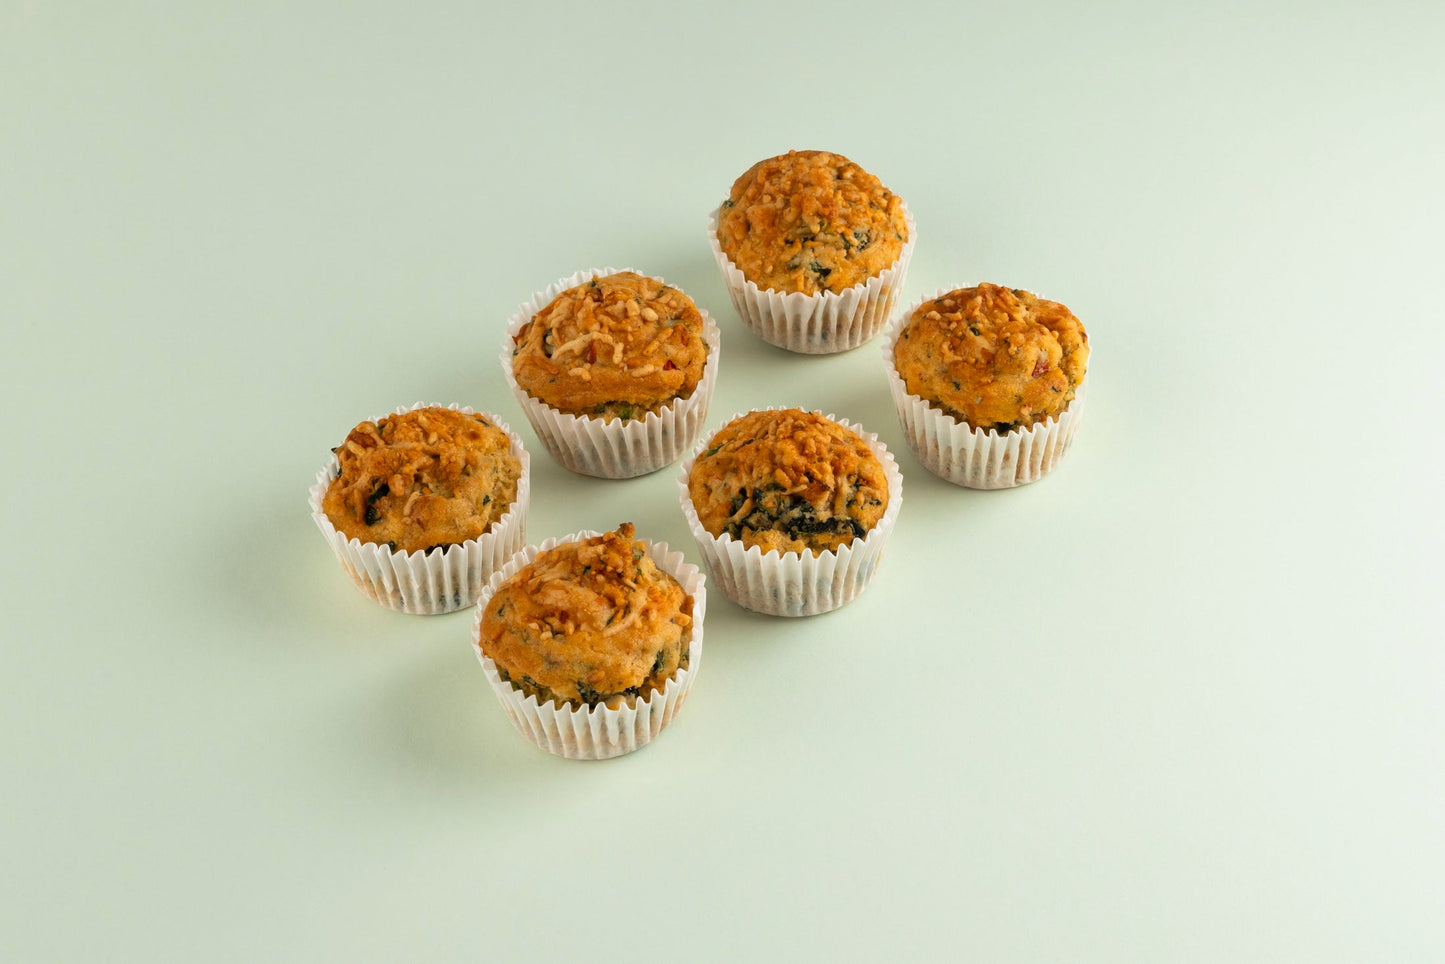 Meetings & Events - 12 Savoury Muffins